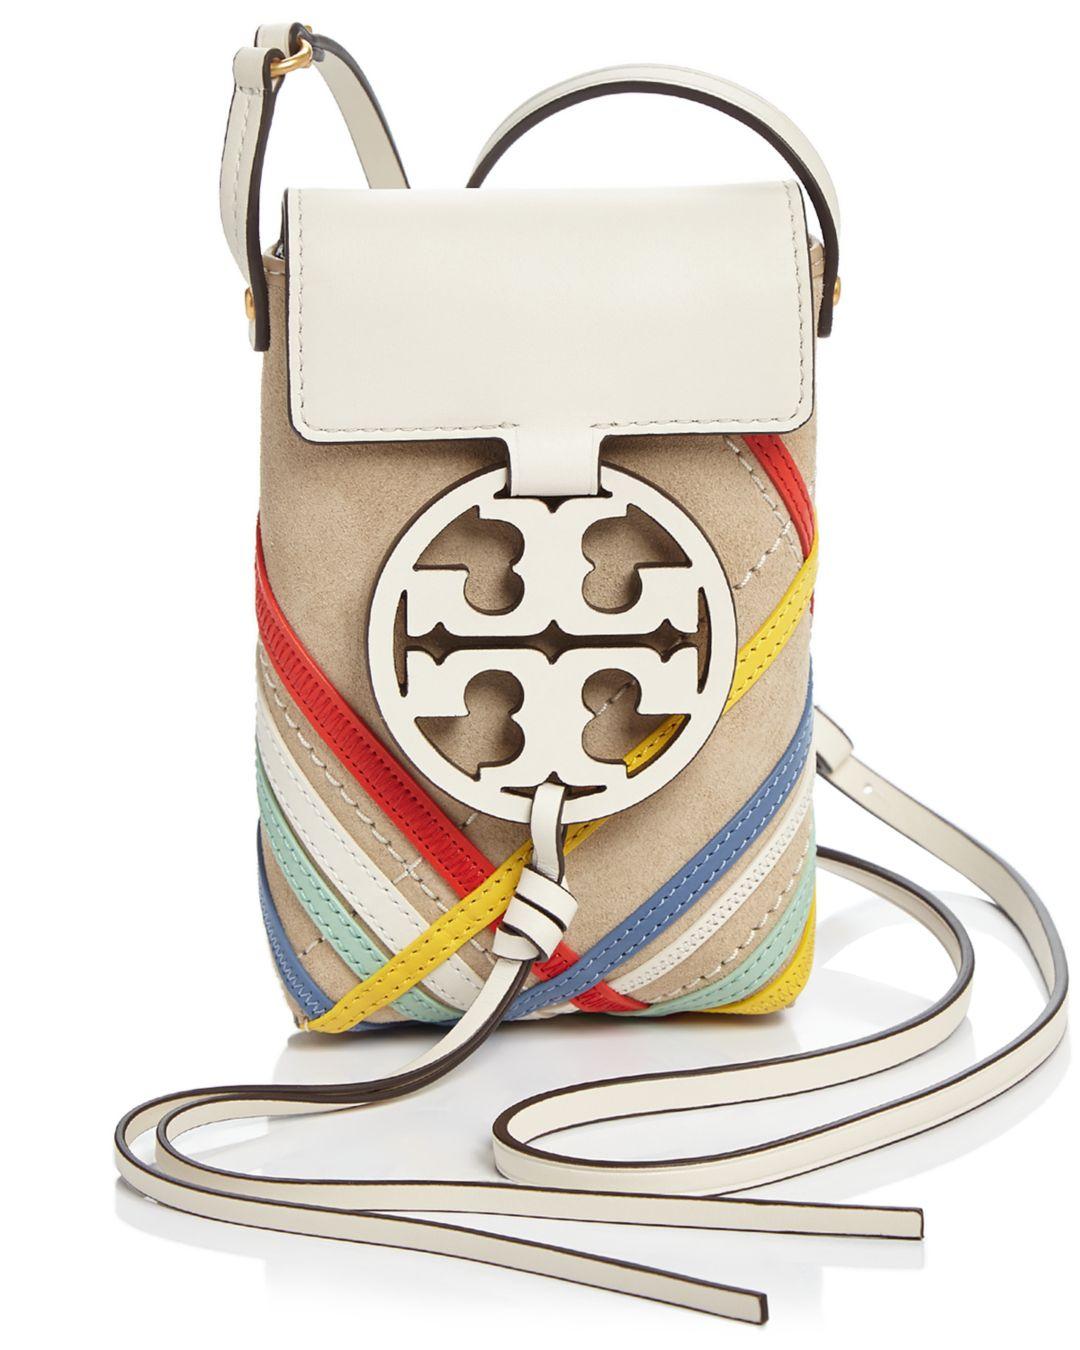 Tory Burch Miller Leather Phone Crossbody Bag in Taupe (Natural) - Save 26% - Lyst